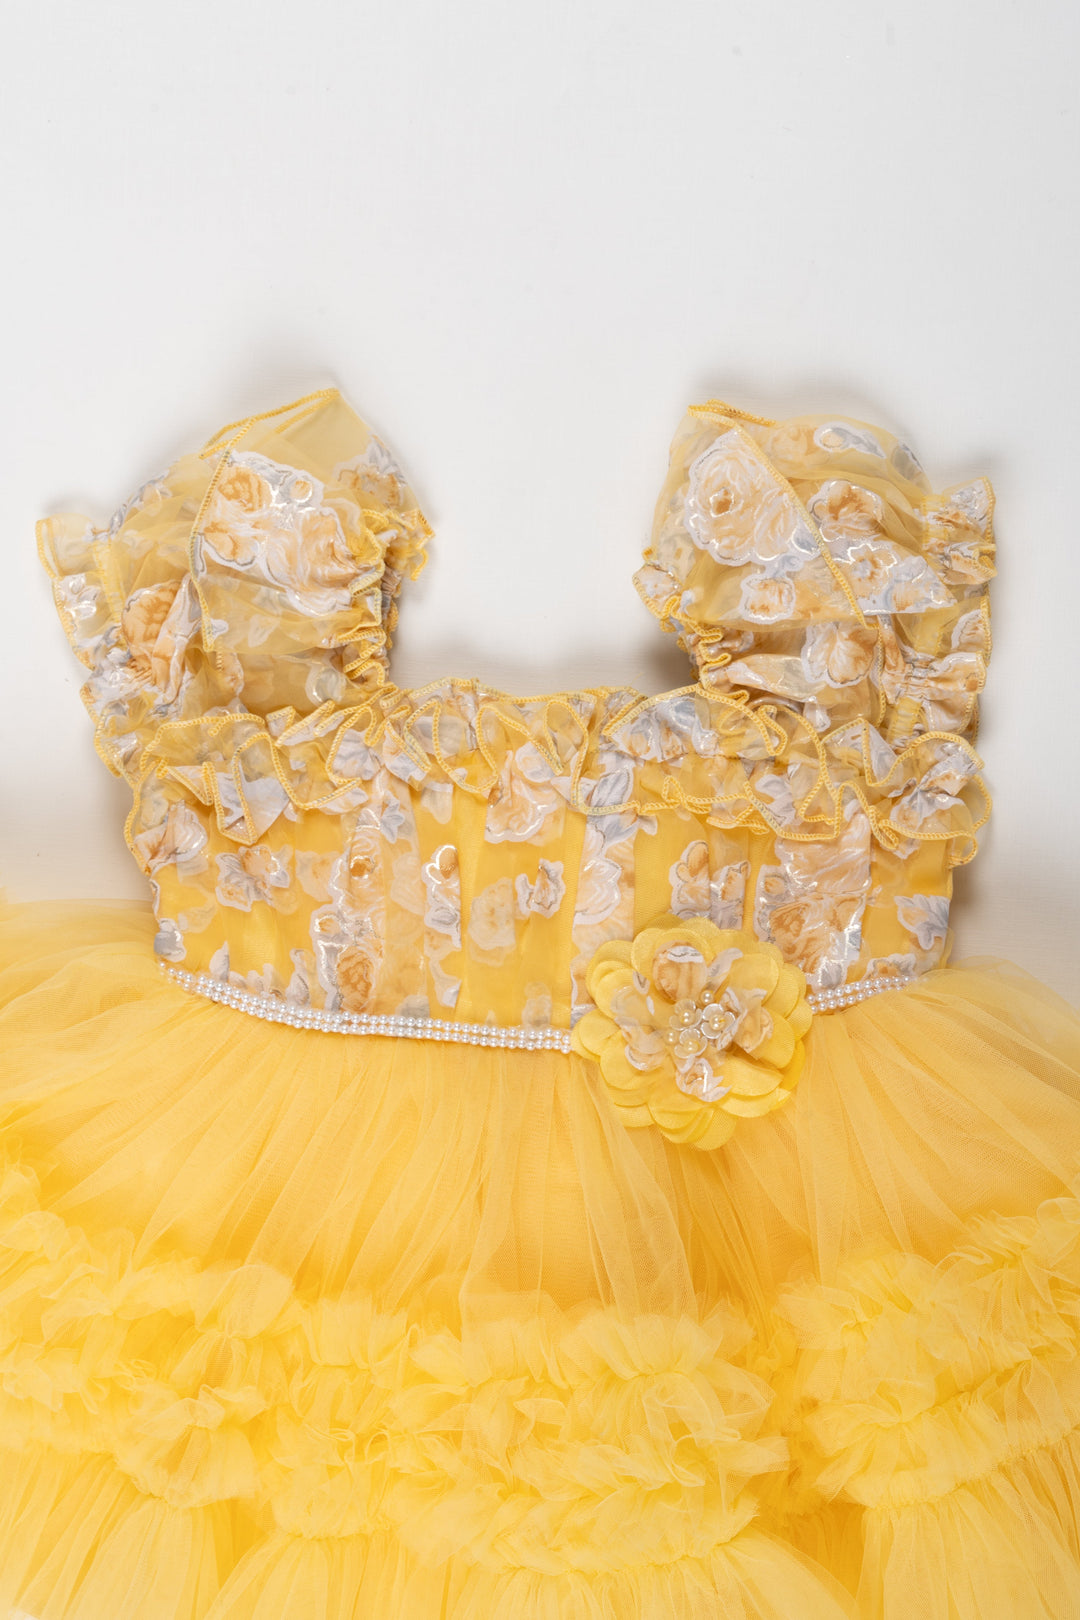 The Nesavu Girls Tutu Frock Sunny Delight Floral Party Frock: Radiance in Ruffles for the Little Charmer Nesavu Buy Toddlers Yellow Floral Boutique Party Dress | Girls Fancy Short Frock Online | The Nesavu